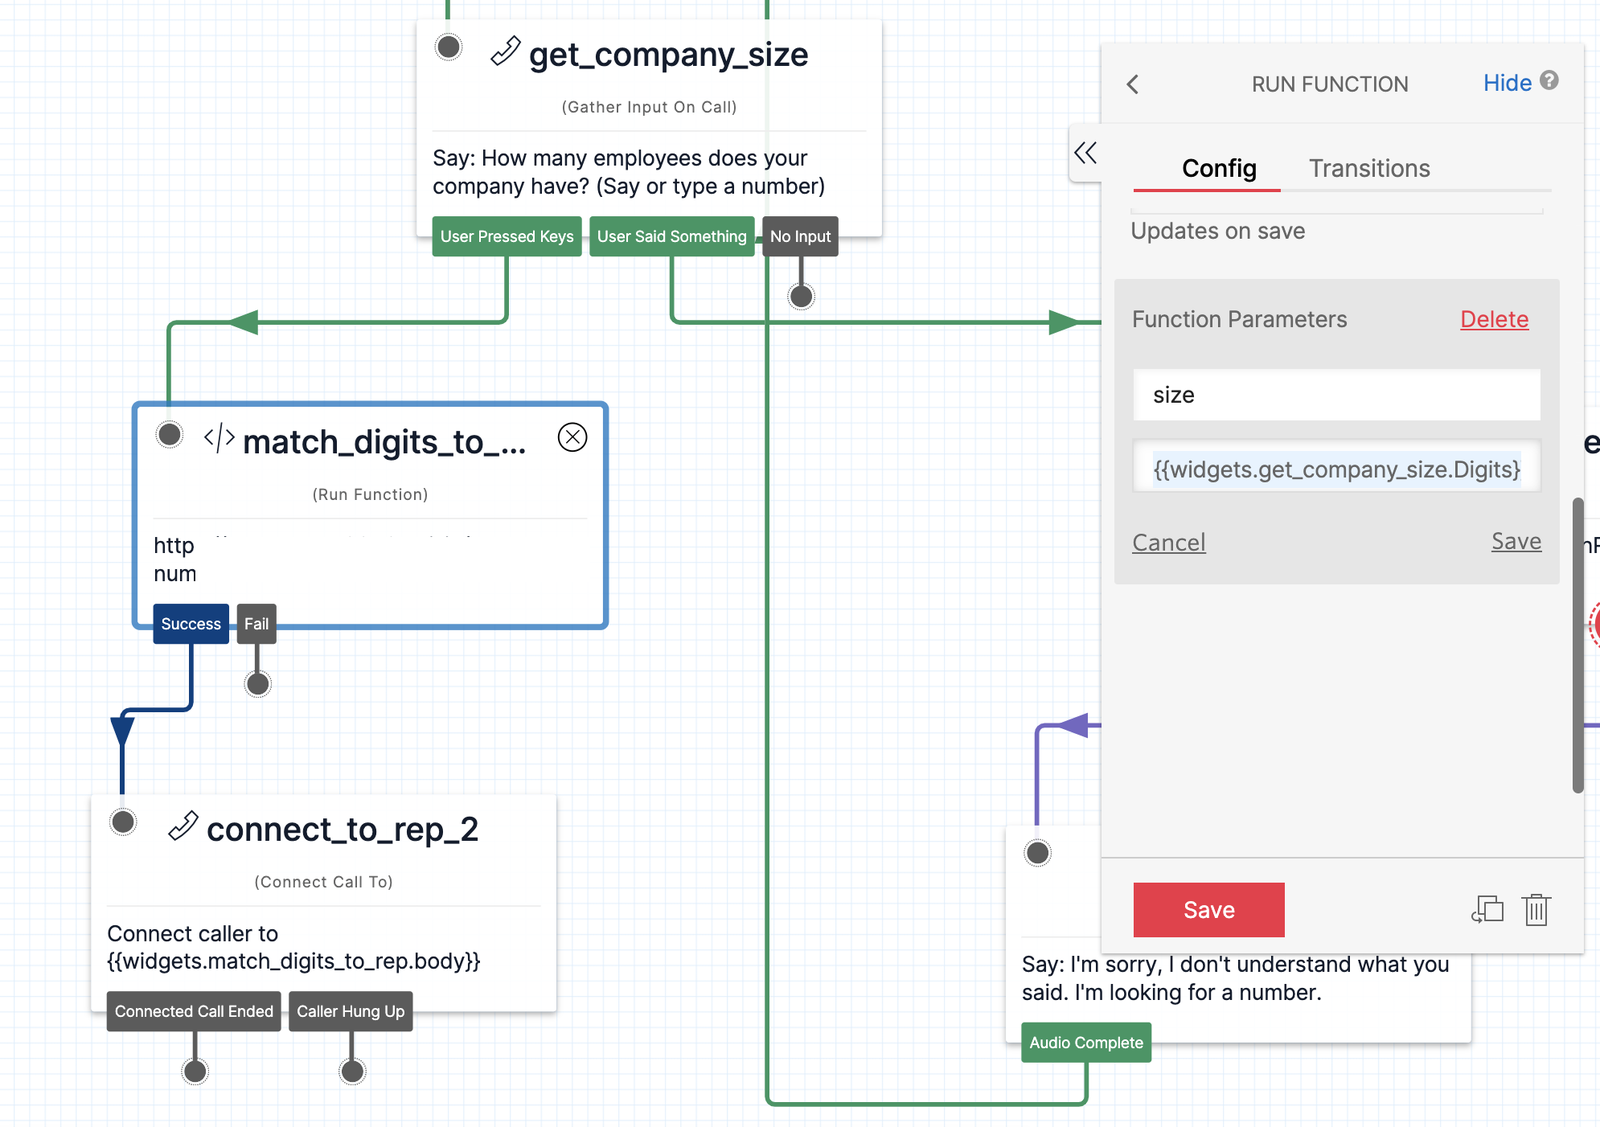 Twilio Studio Tutorial Route Leads Connect To Rep From Digits using Run Function and Connect Call To Widgets On Canvas.